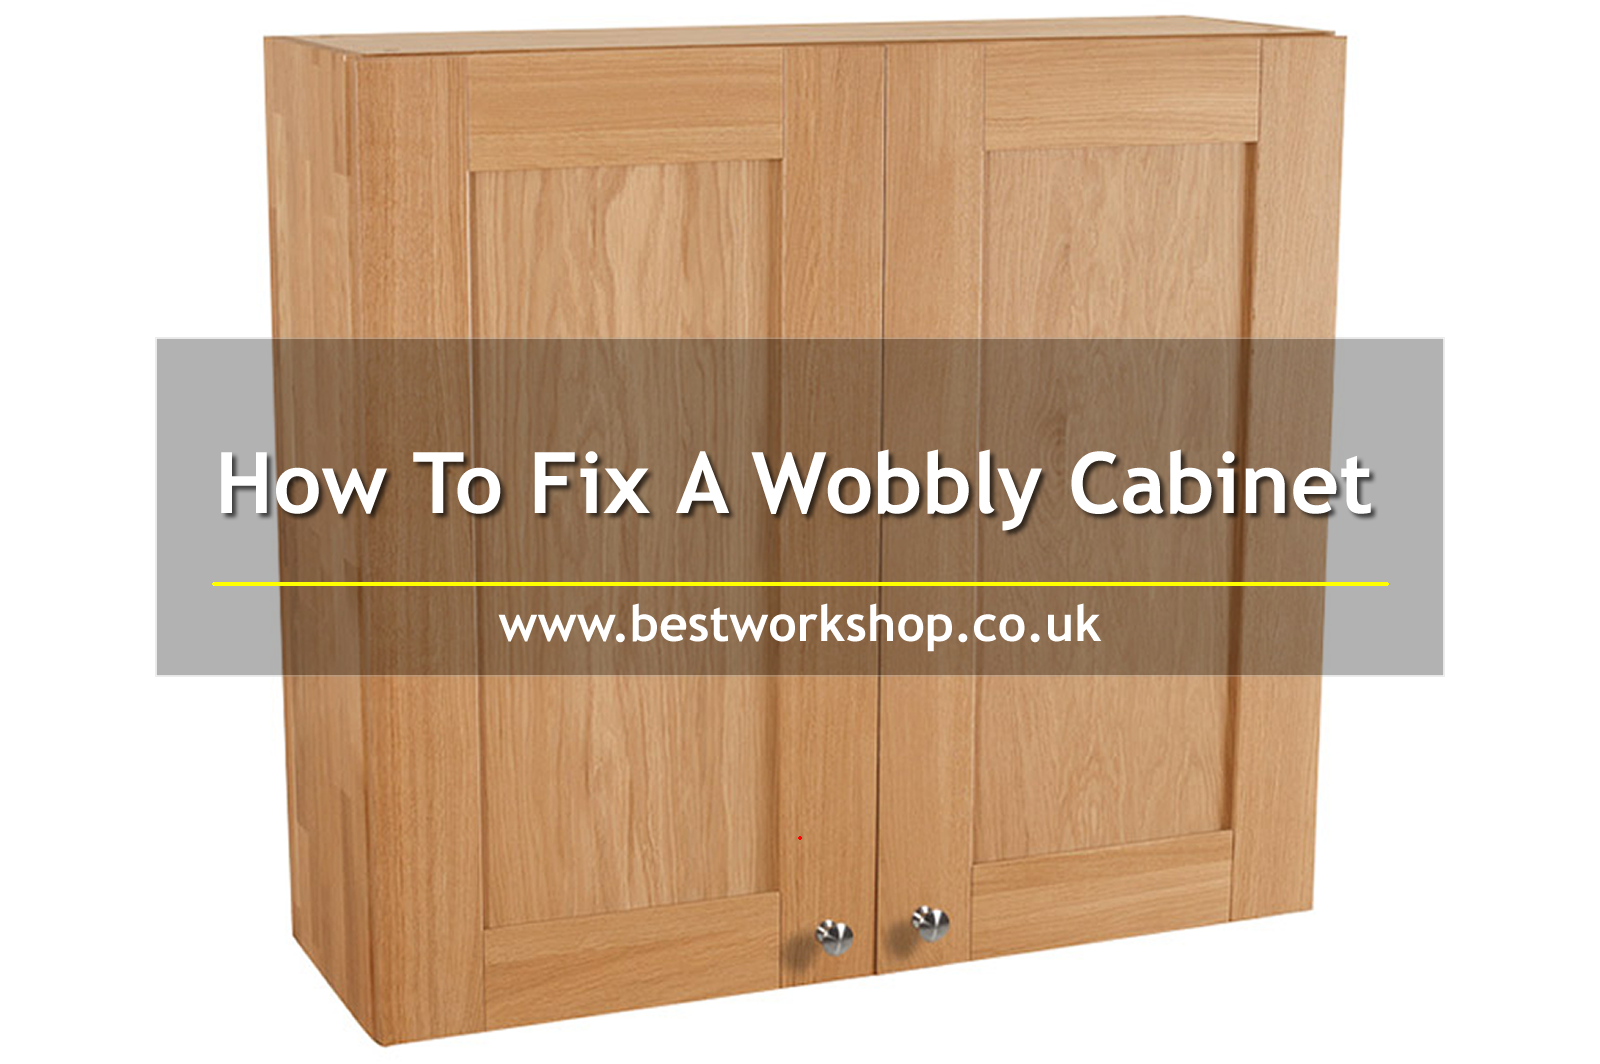 How To Fix A Wobbly Cabinet